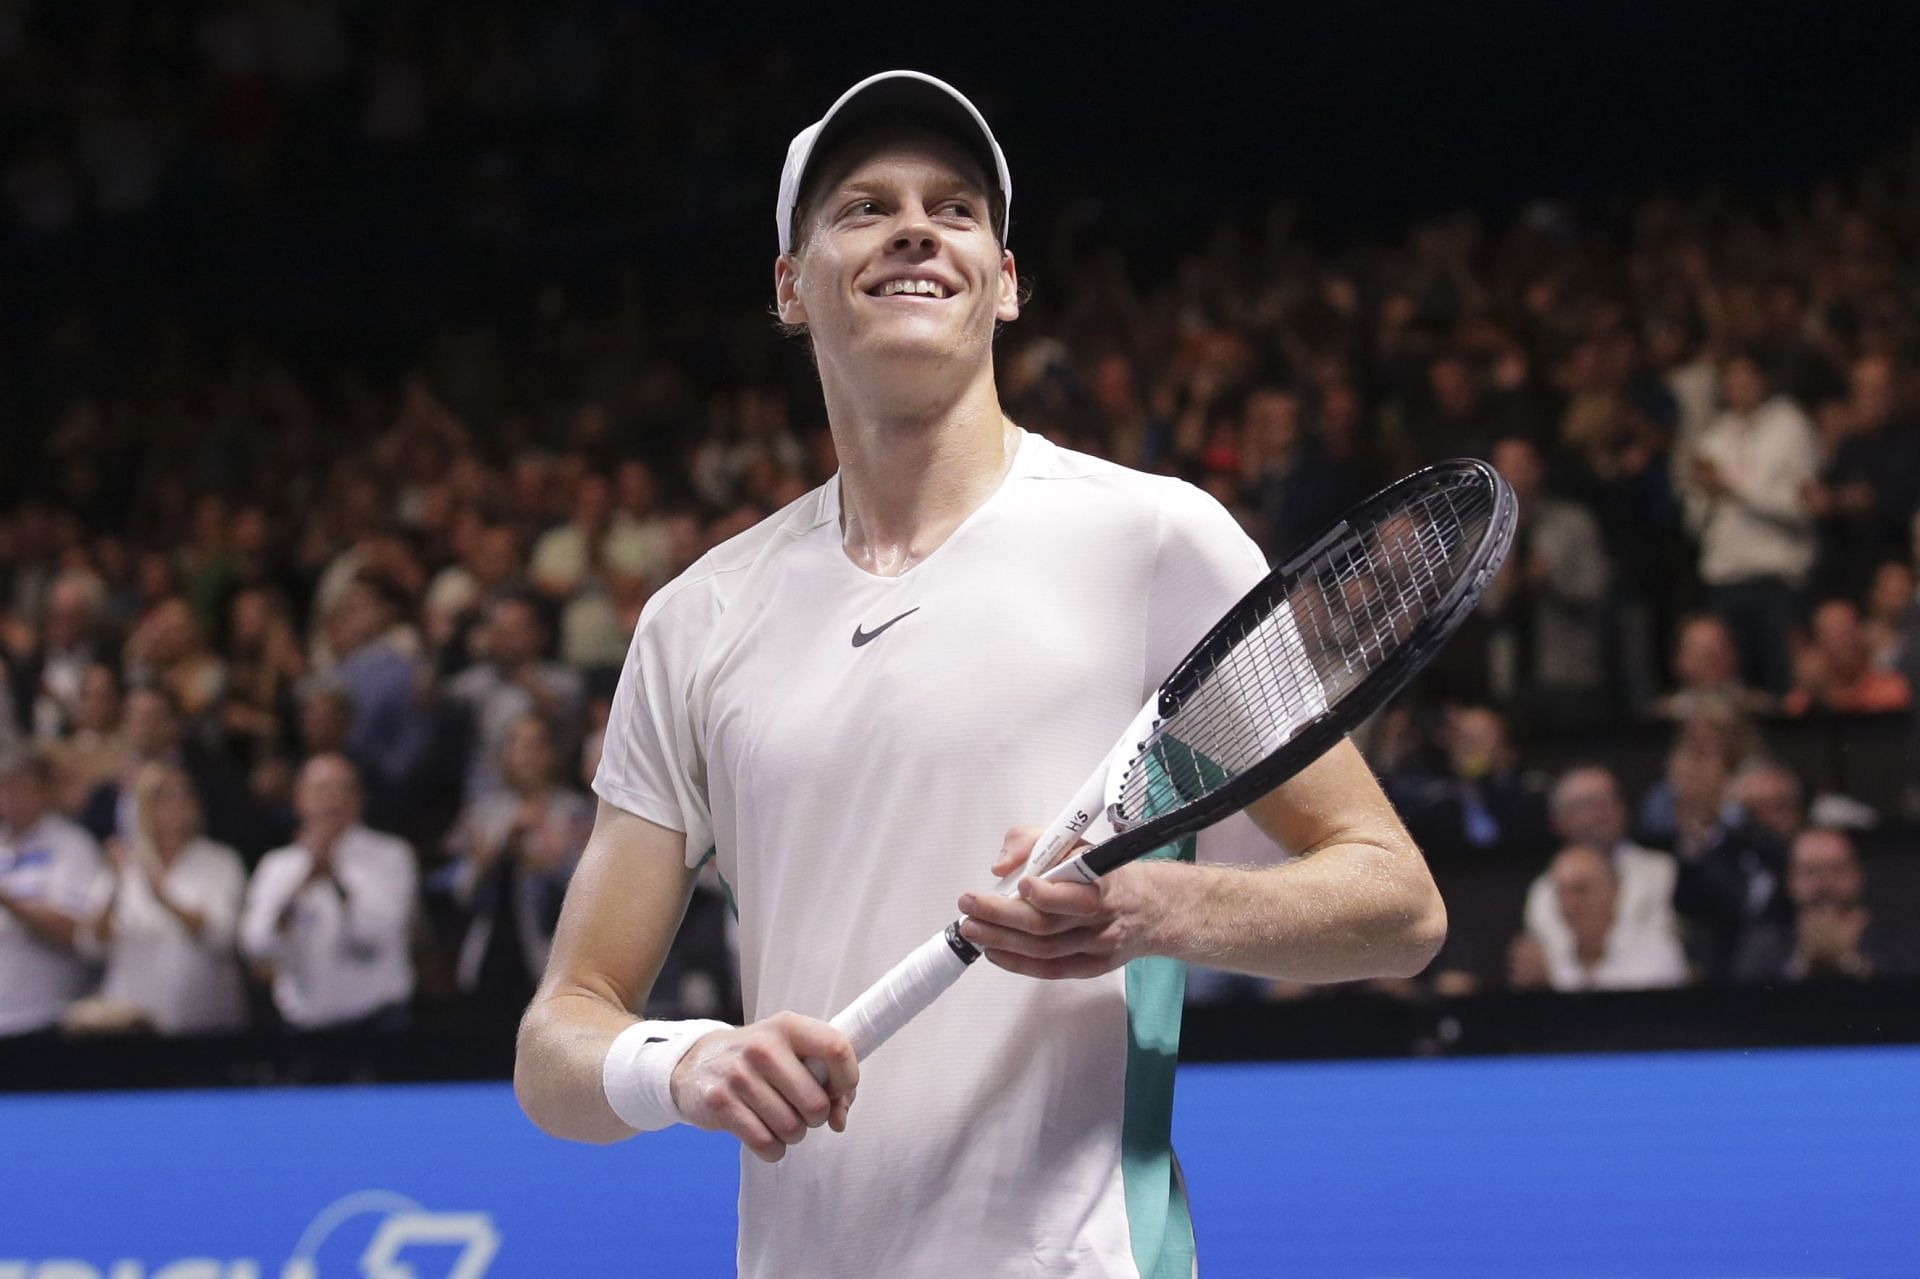 Sinner is ready for the 2023 ATP Finals